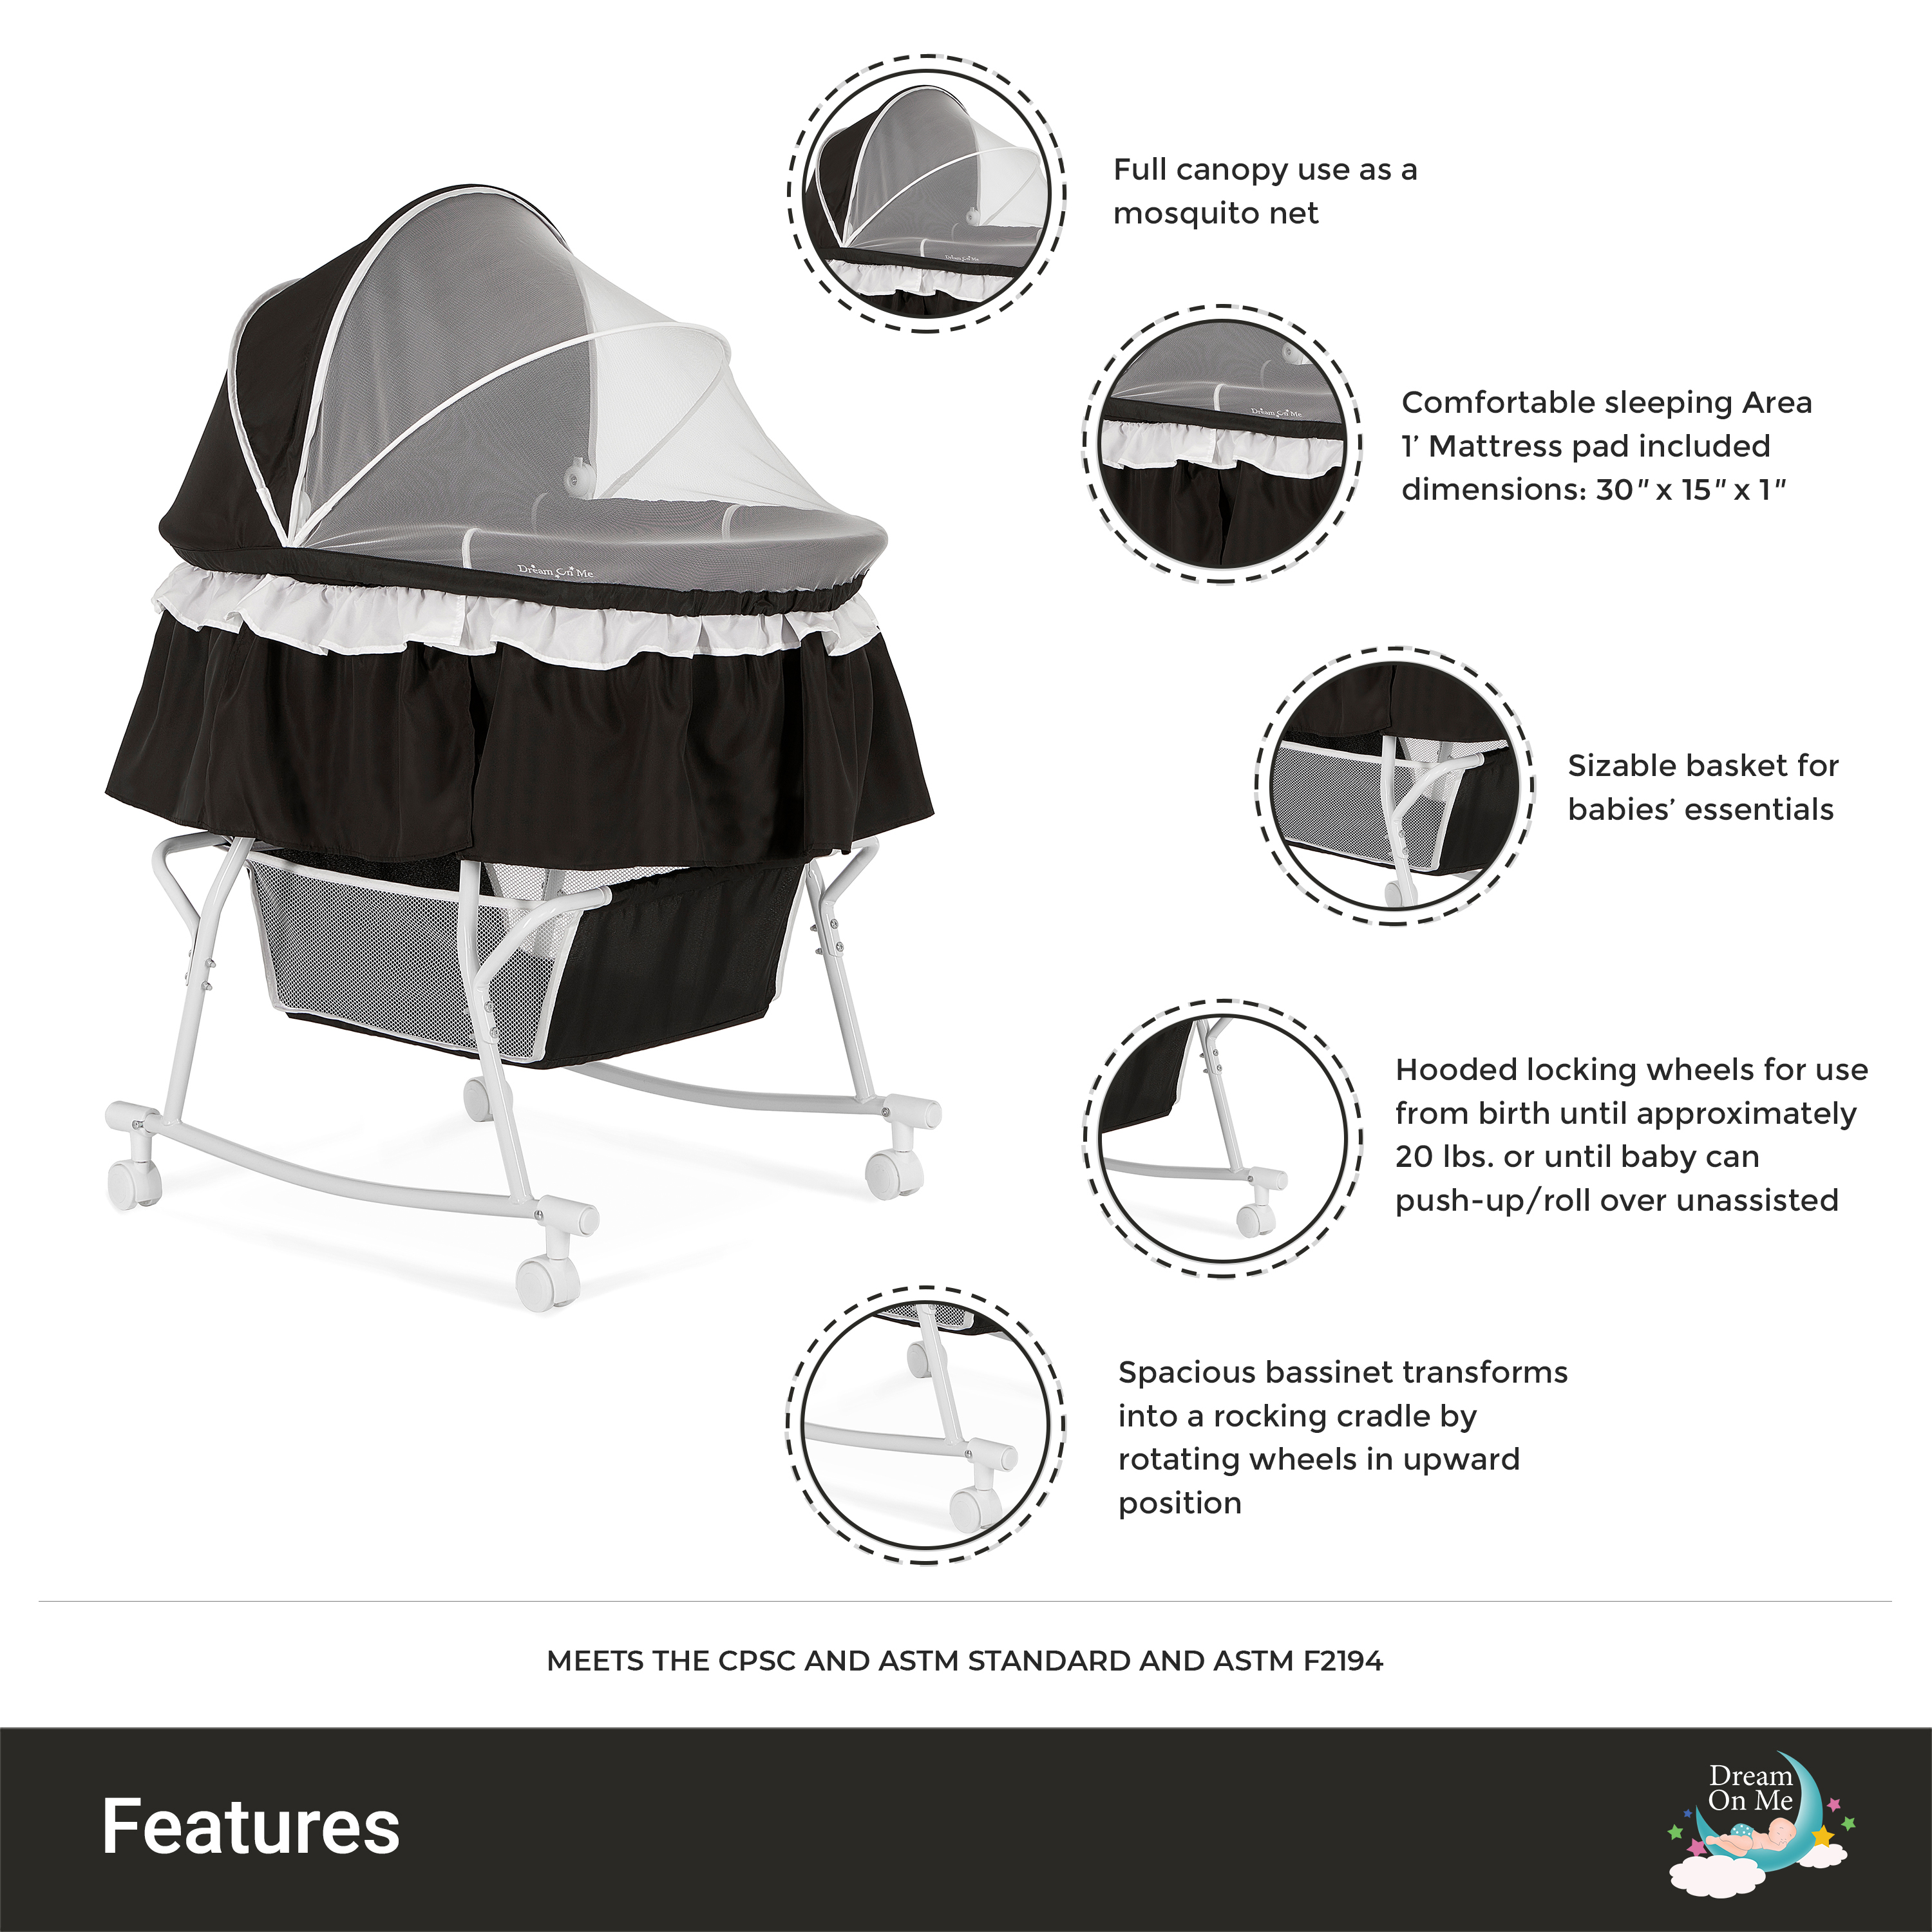 Dream On Me Lacy Portable 2-in-1 Bassinet & Cradle in Black, Lightweight Baby Bassinet - image 2 of 24